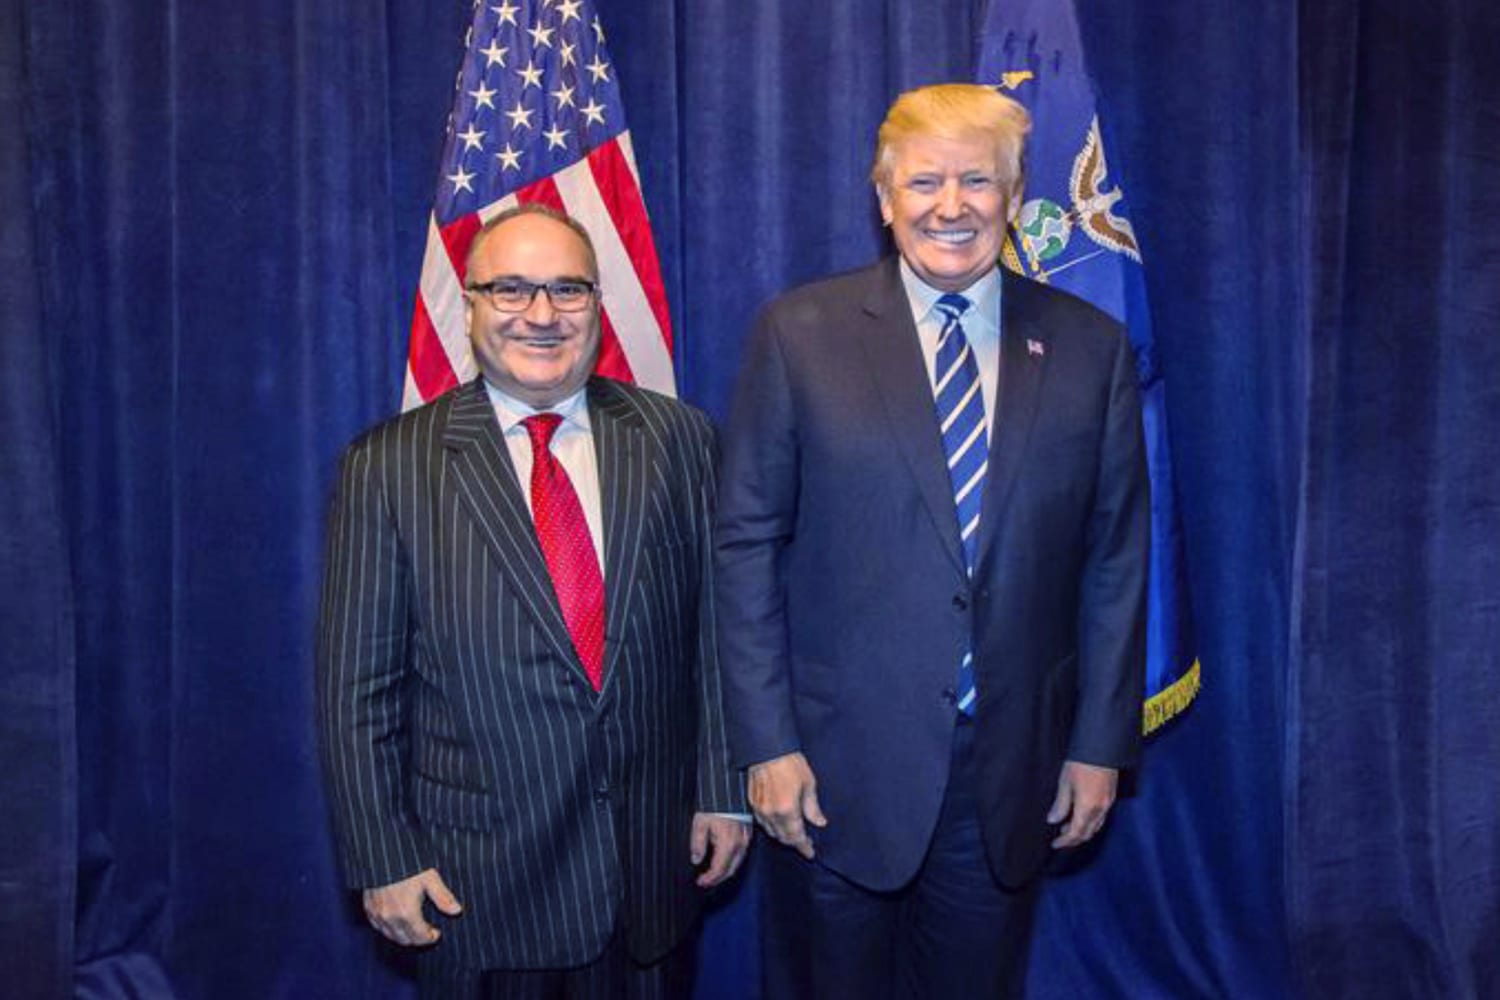 Russia probe witness George Nader arrested on child porn charges pic